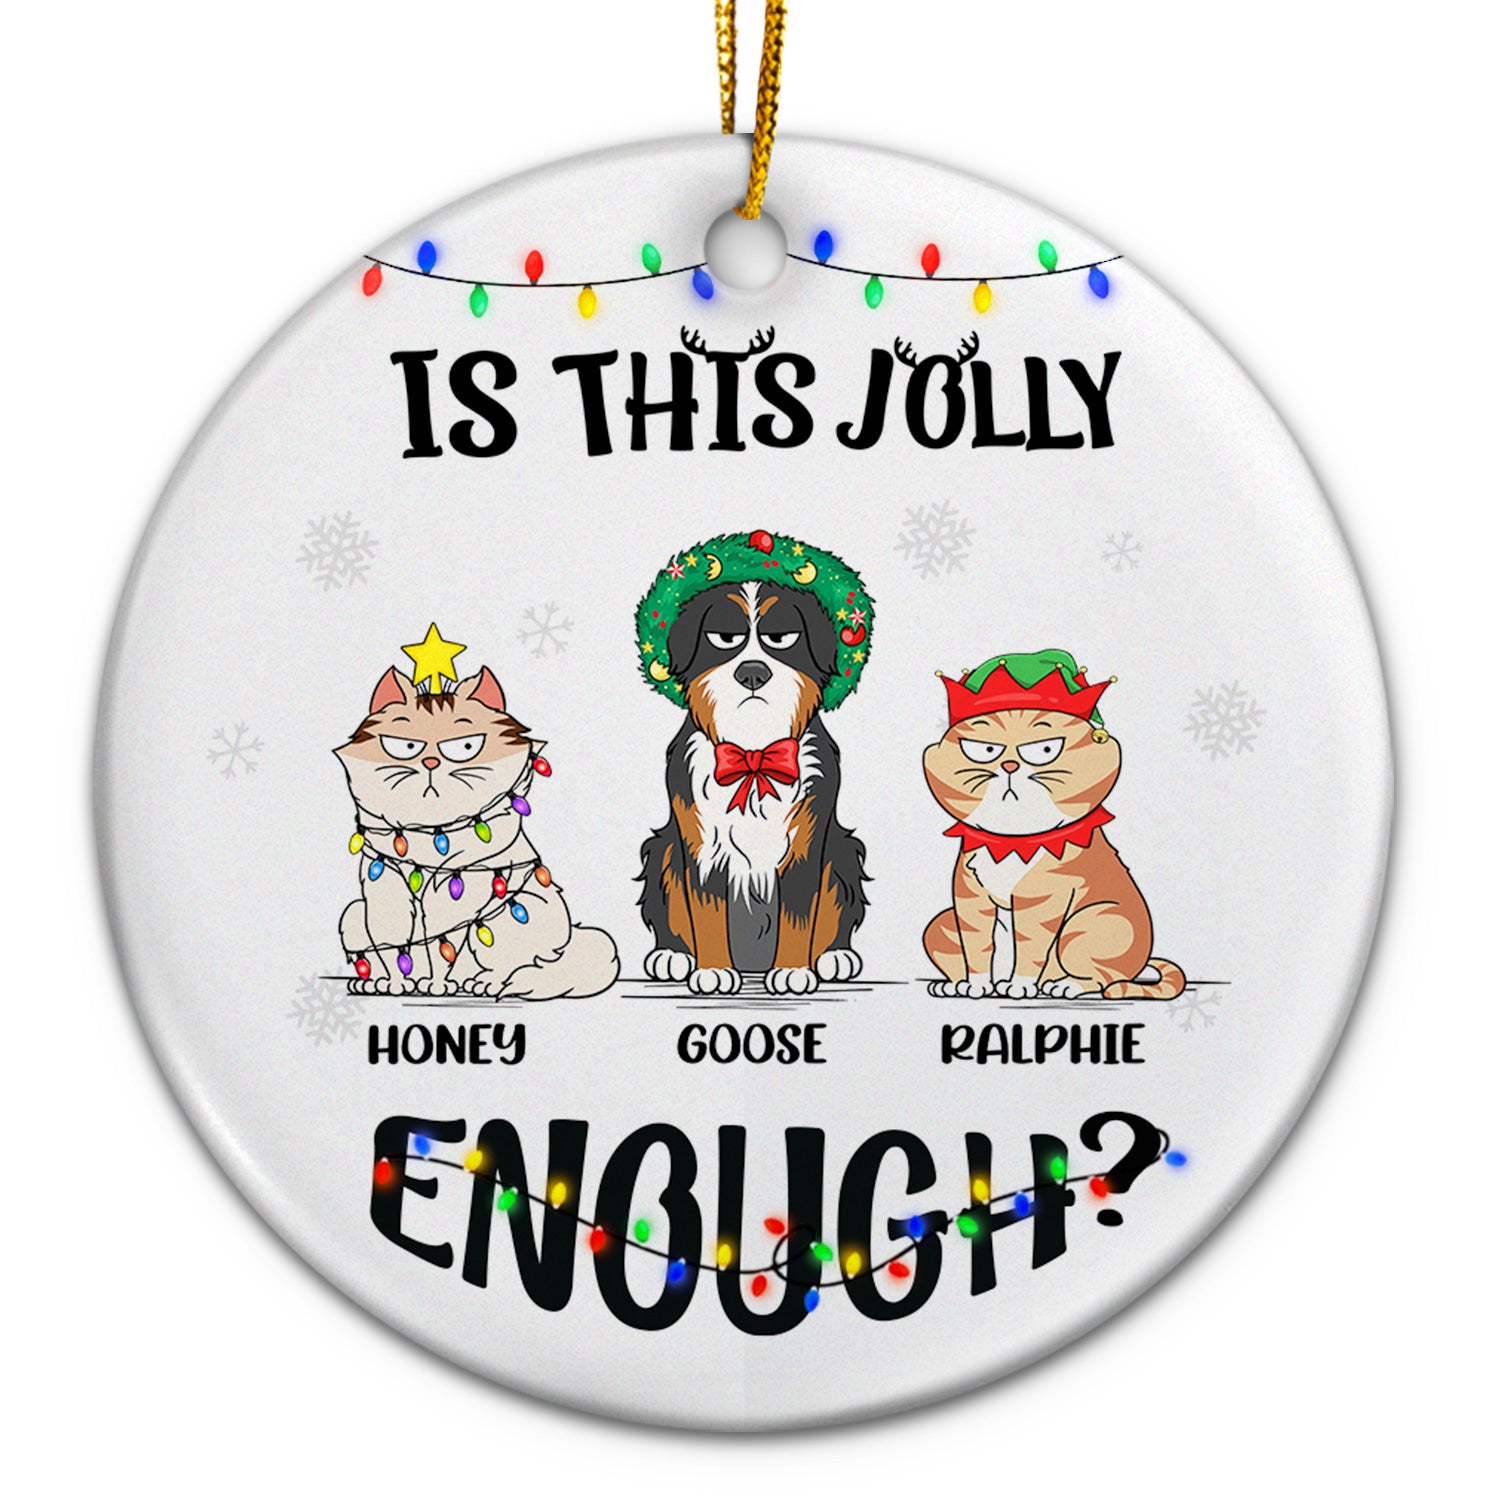 Is This Jolly Enough - Funny, Christmas Gift For Cat Lover, Dog Lover, Pet Owner - Personalized Circle Ceramic Ornament